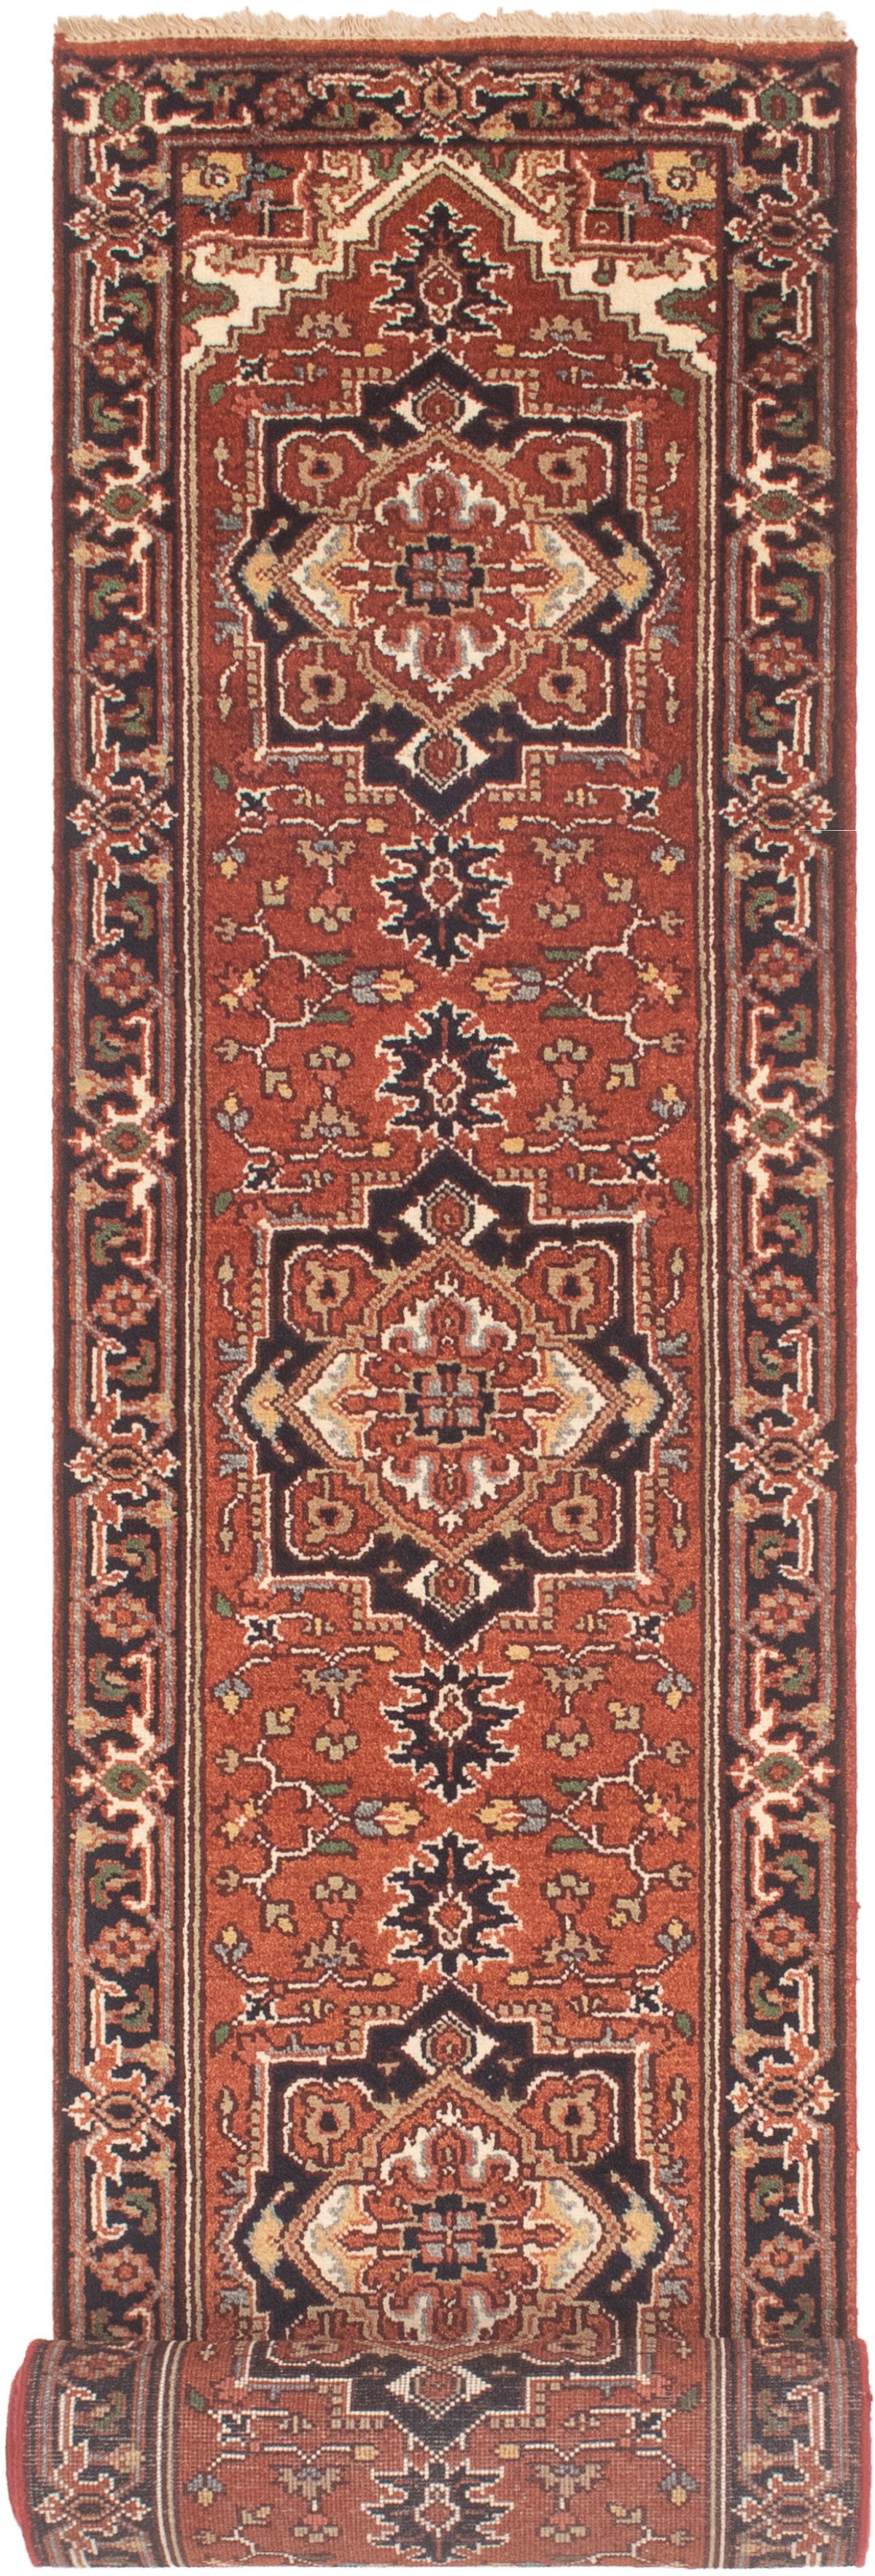 Hand-knotted Serapi Heritage Dark Copper Wool Rug 2'7" x 19'6"  Size: 2'7" x 19'6"  